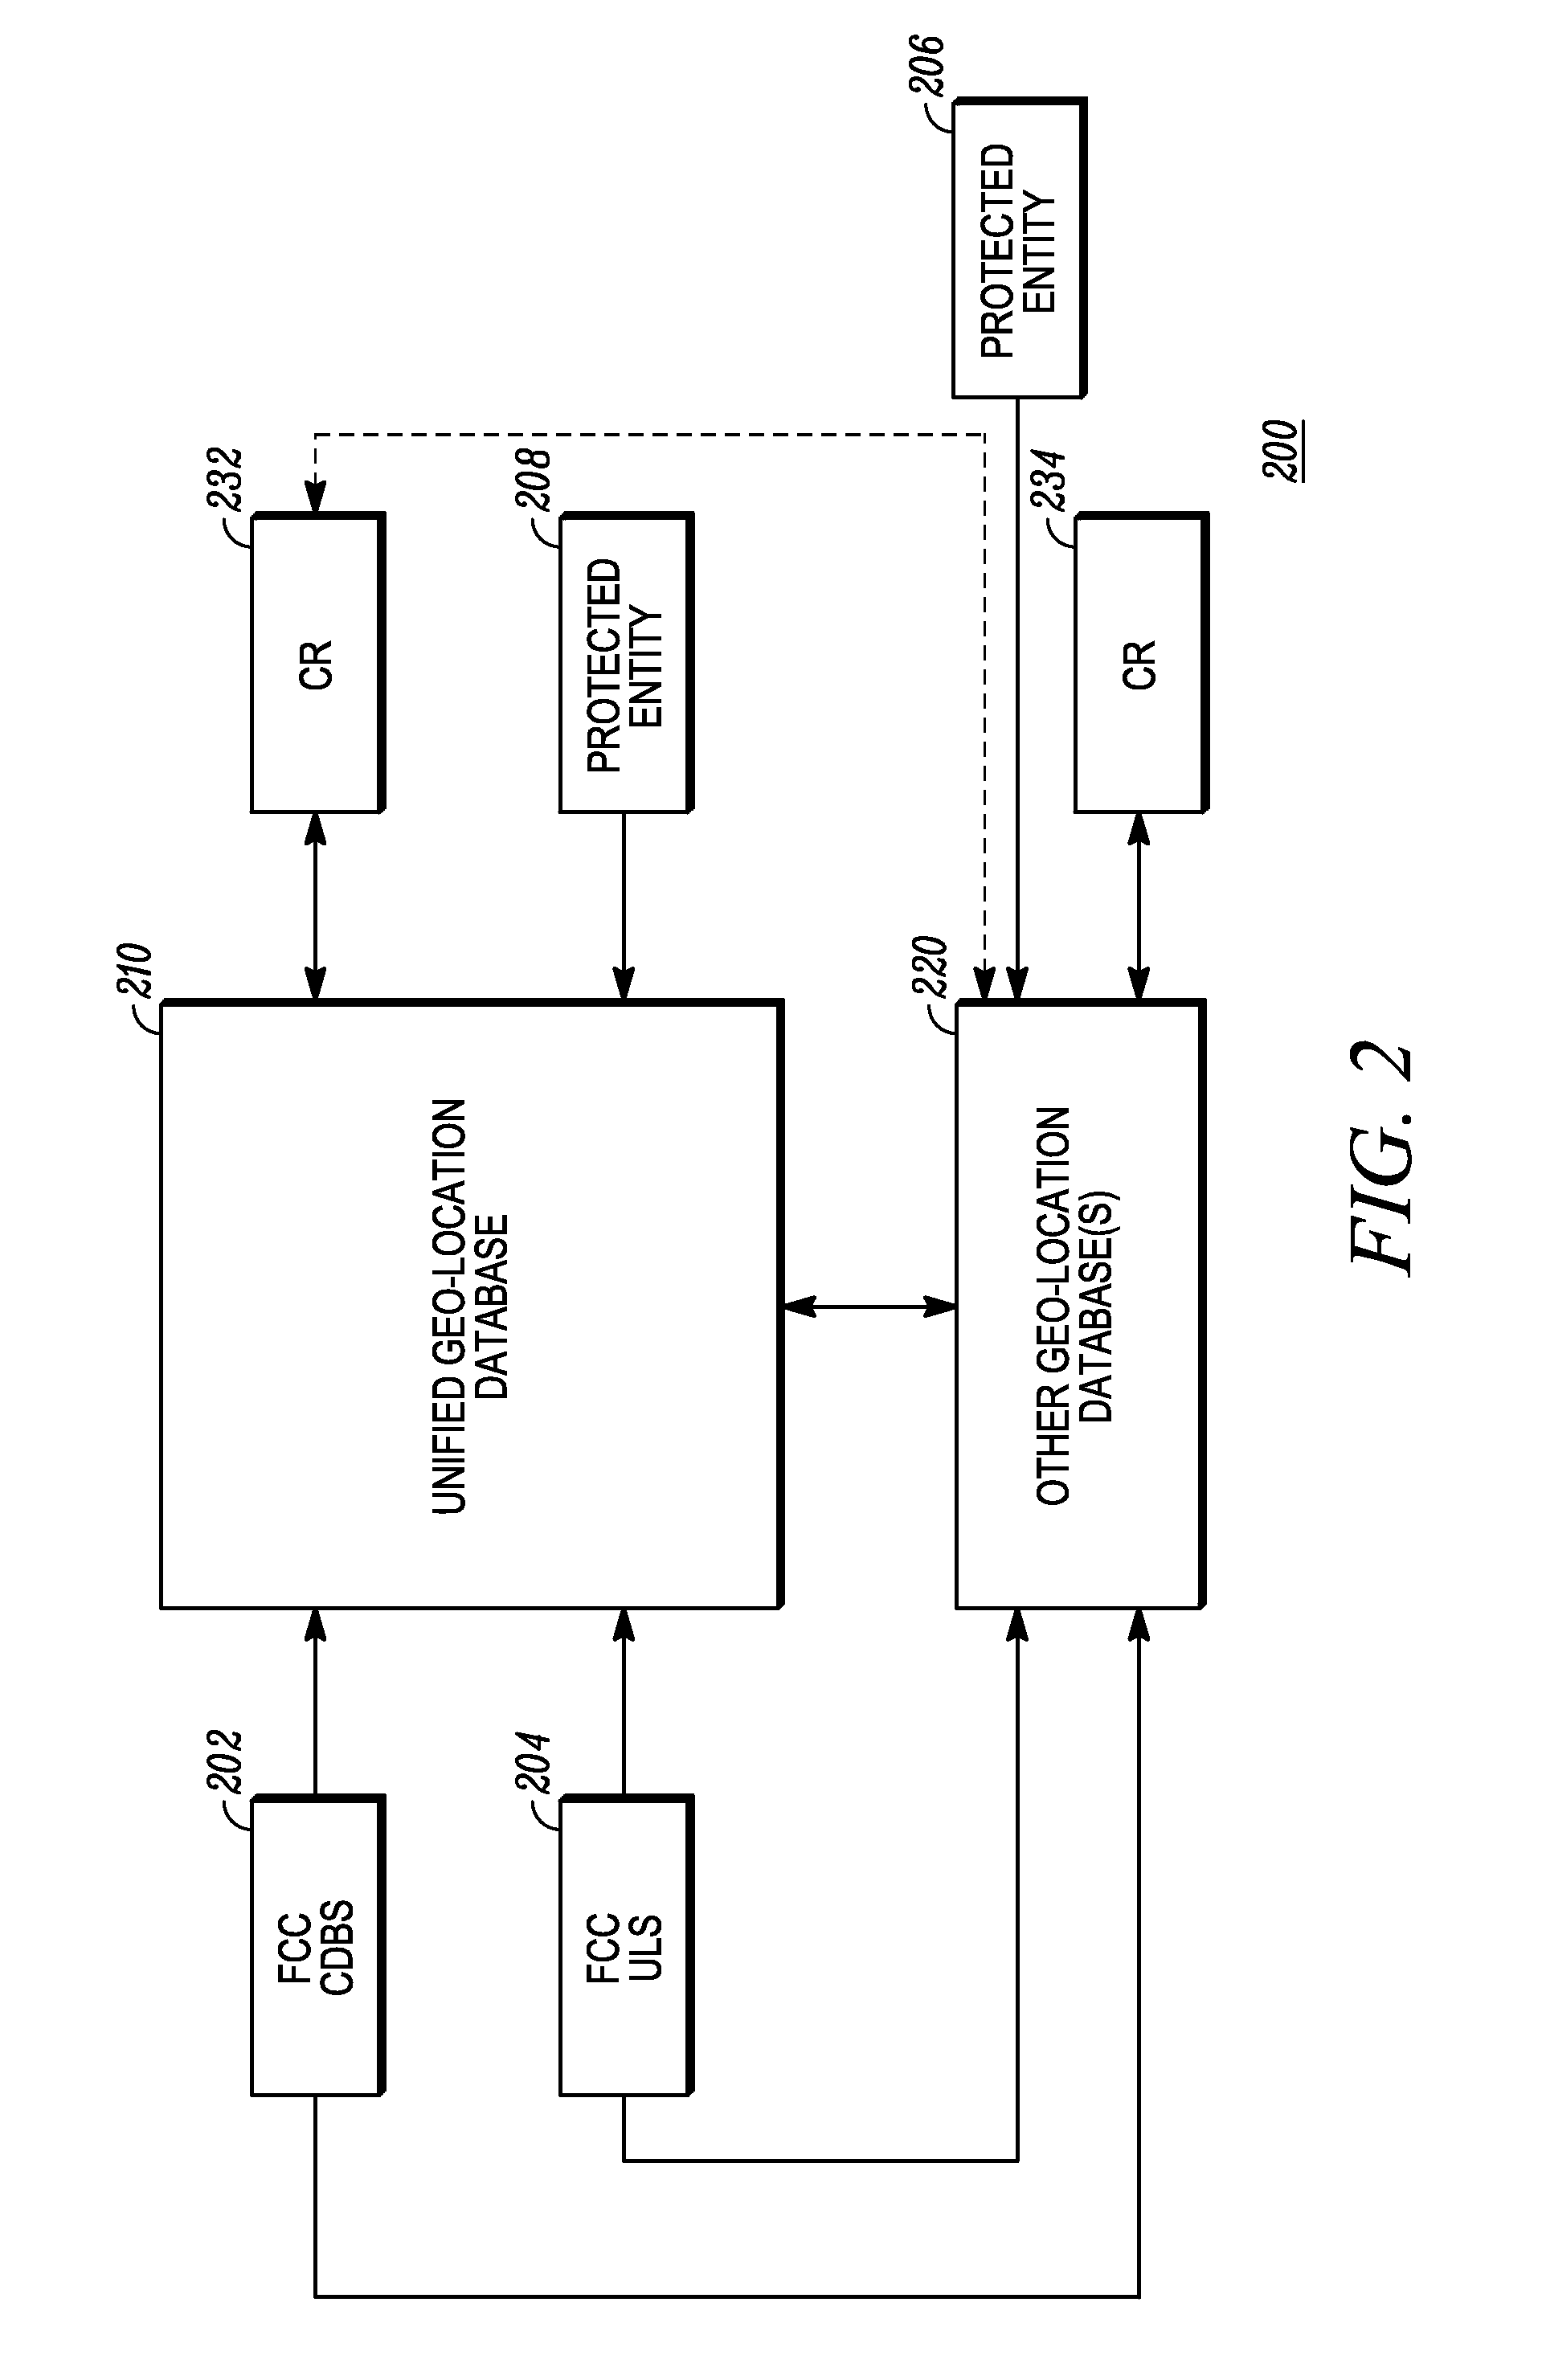 Method and apparatus for automatically ensuring consistency among multiple spectrum databases